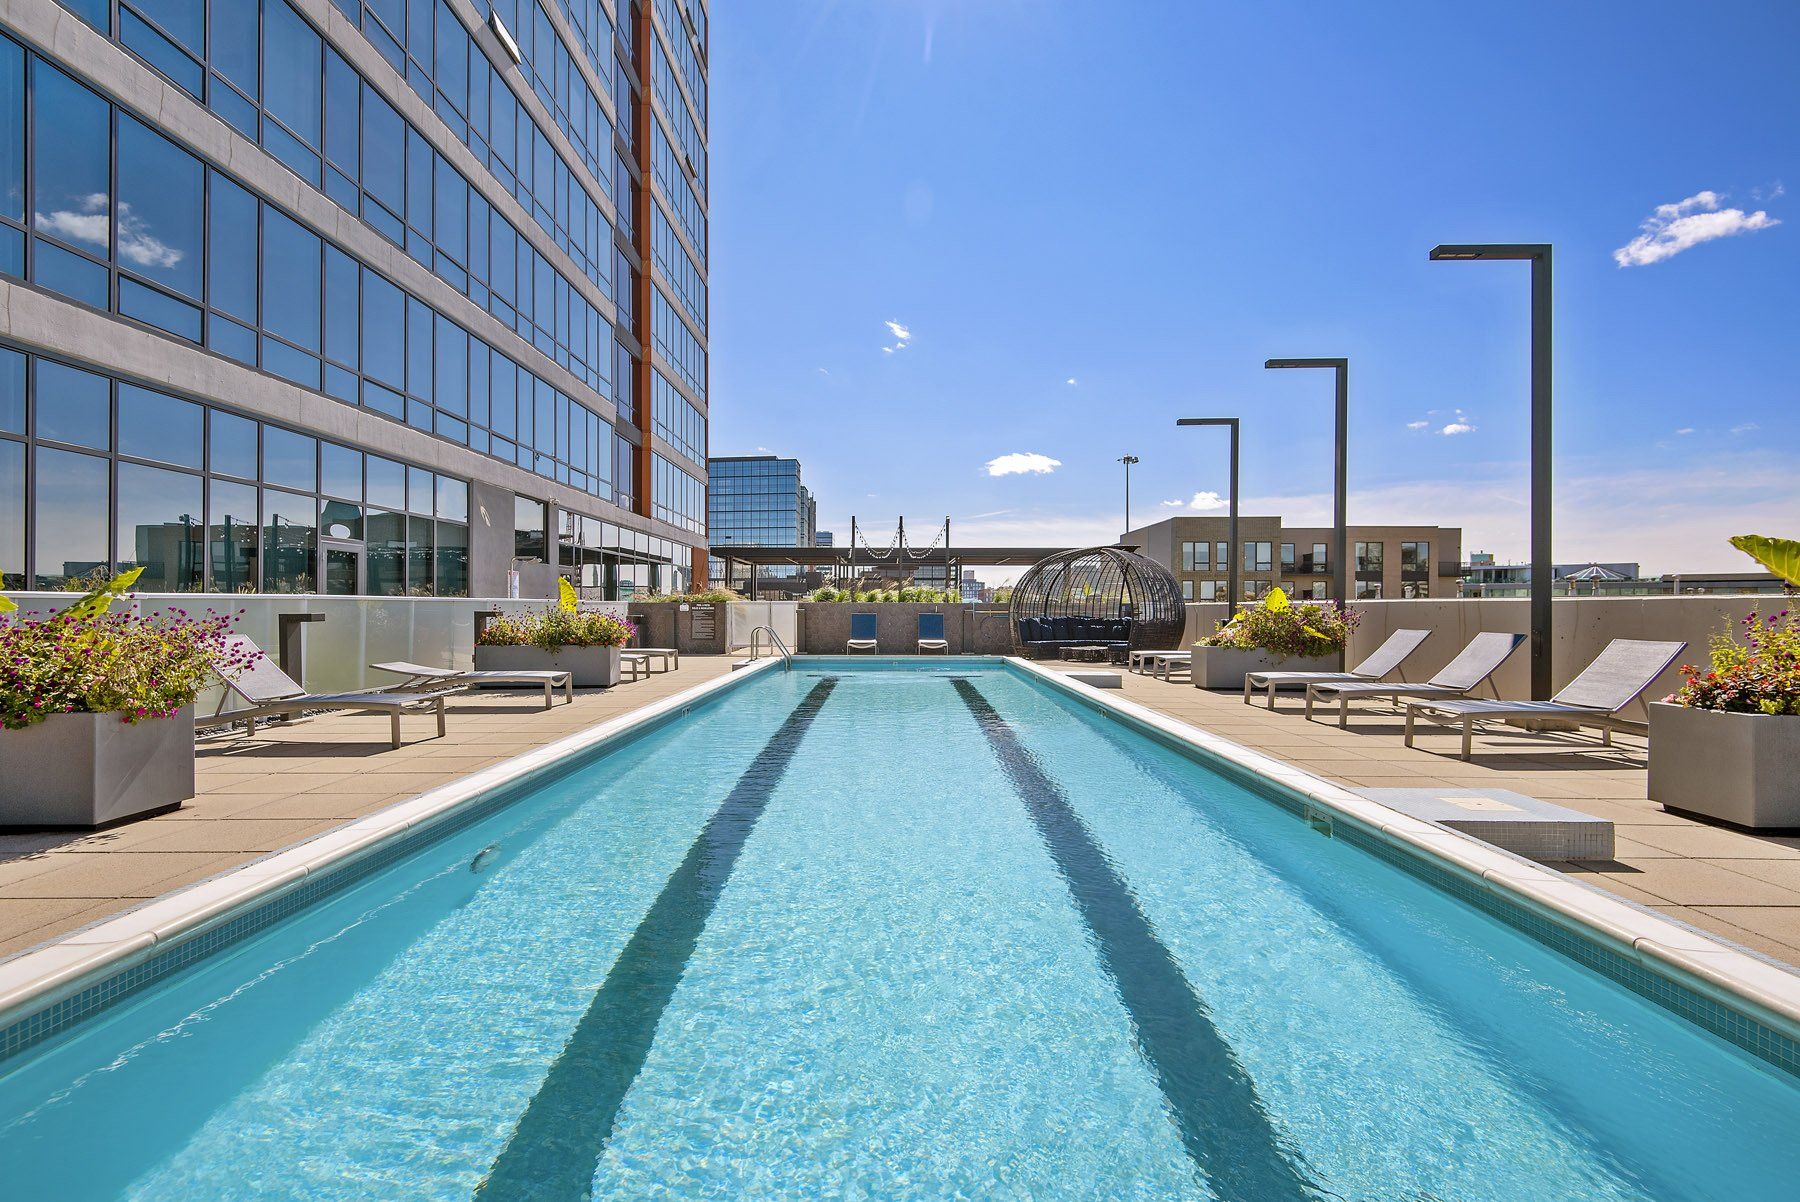 Resort style pool at Reside on Green Street.